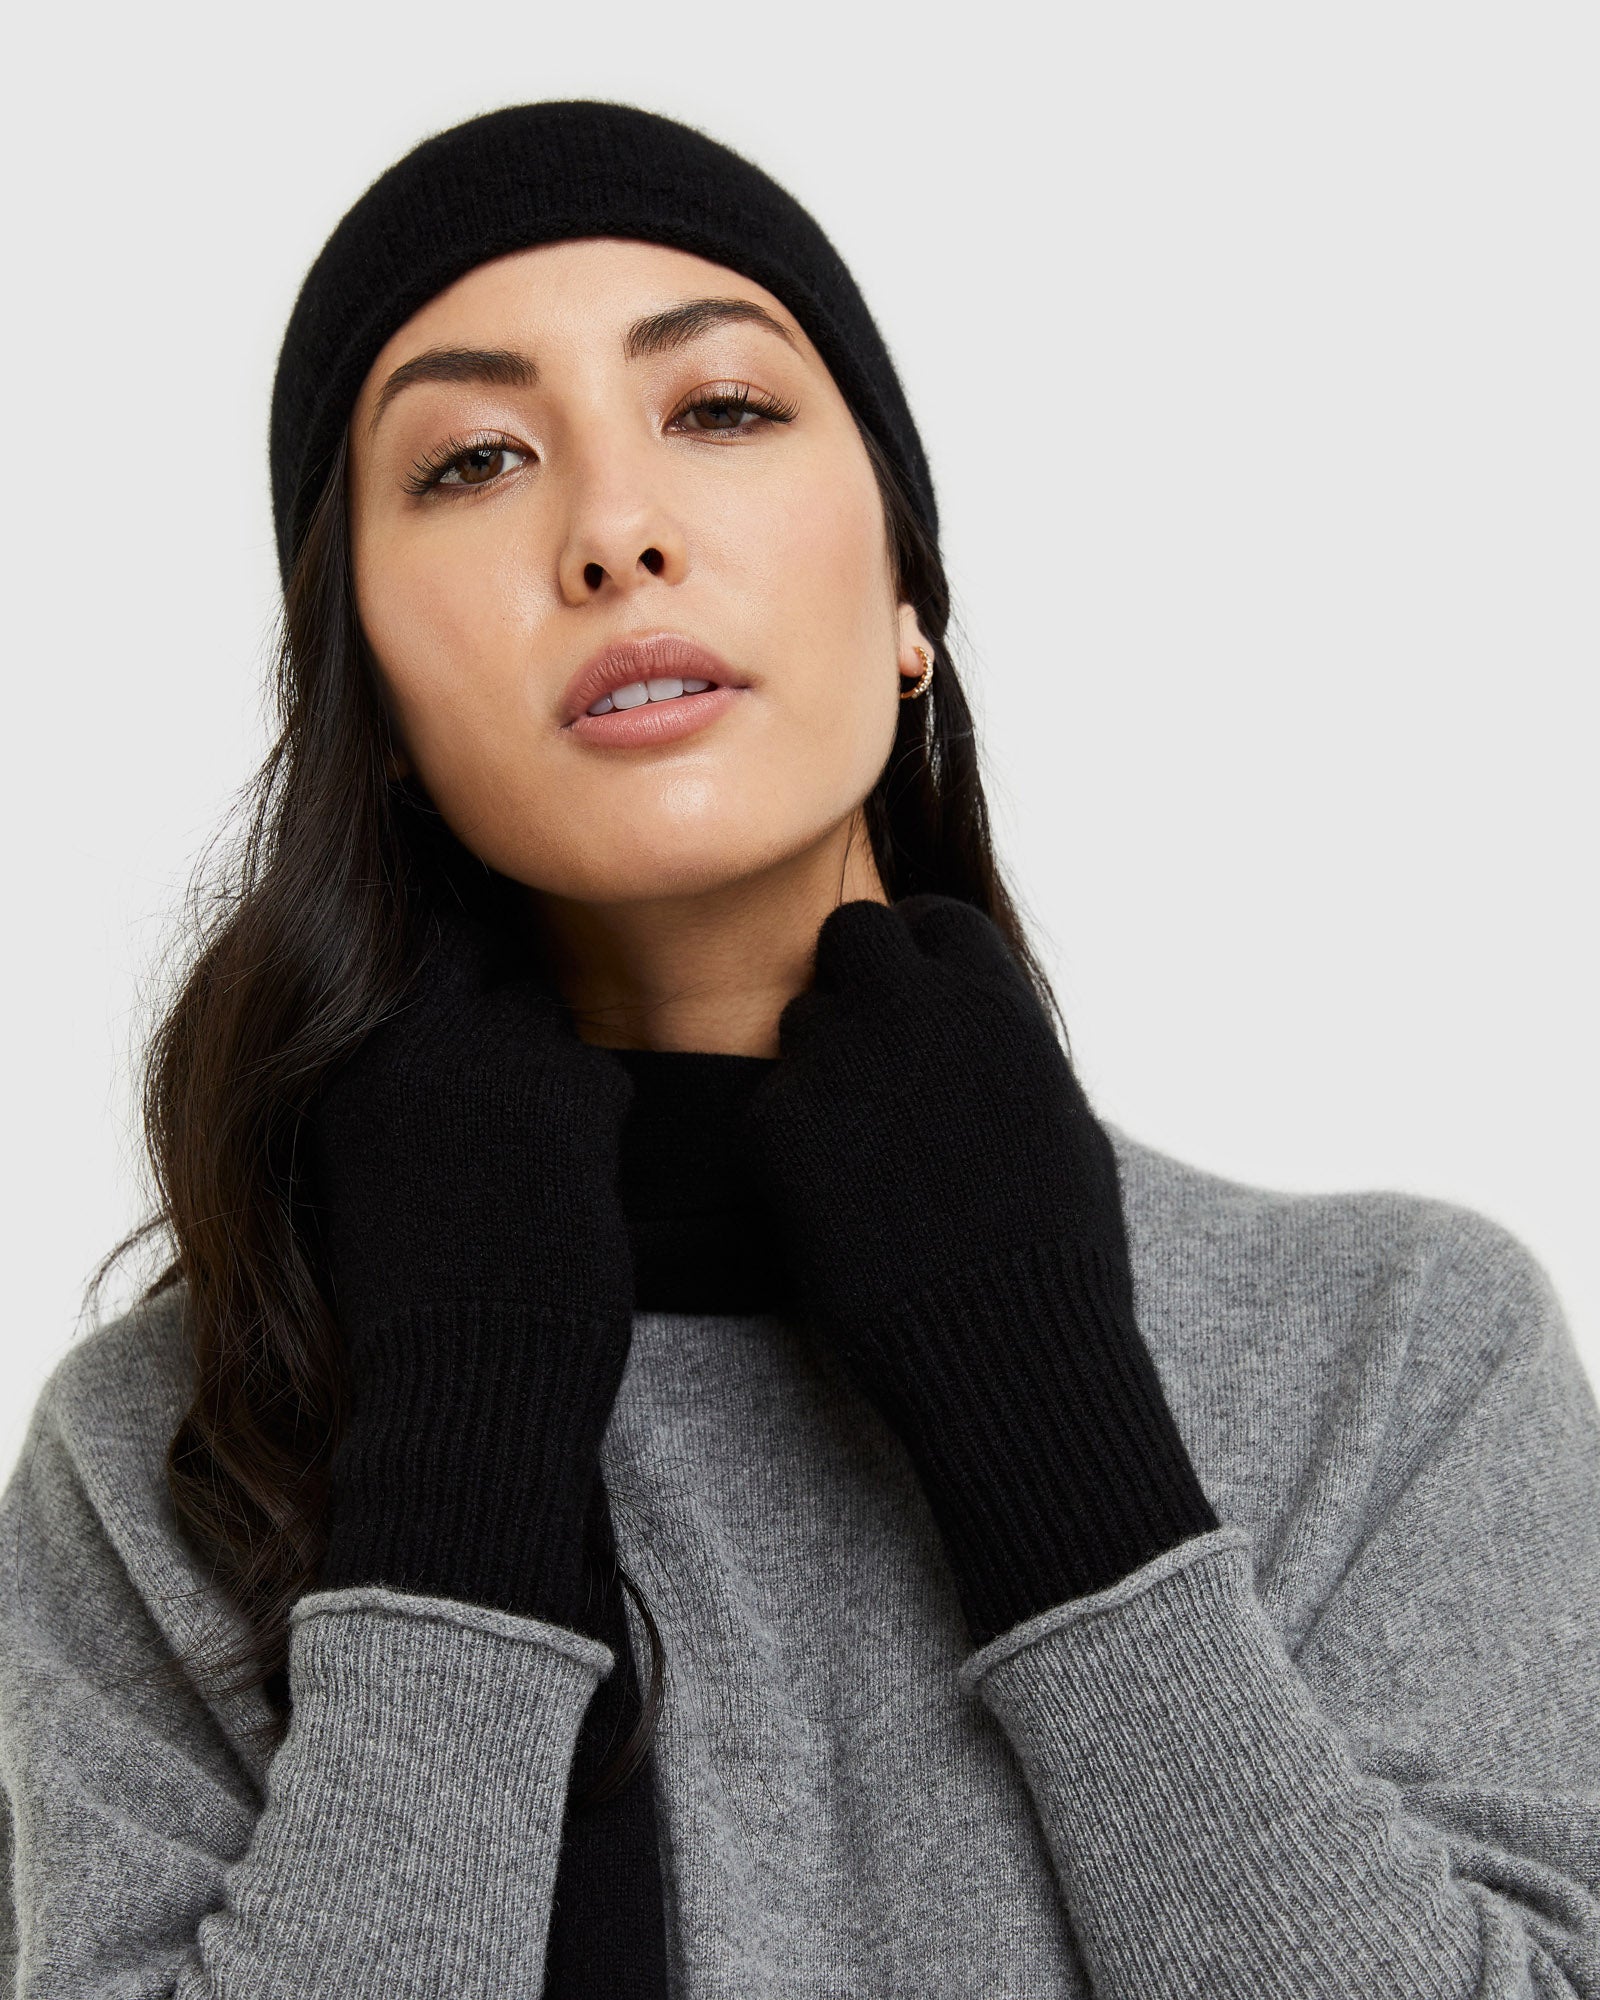 The $28 Mongolian Cashmere Gloves – Last Brand